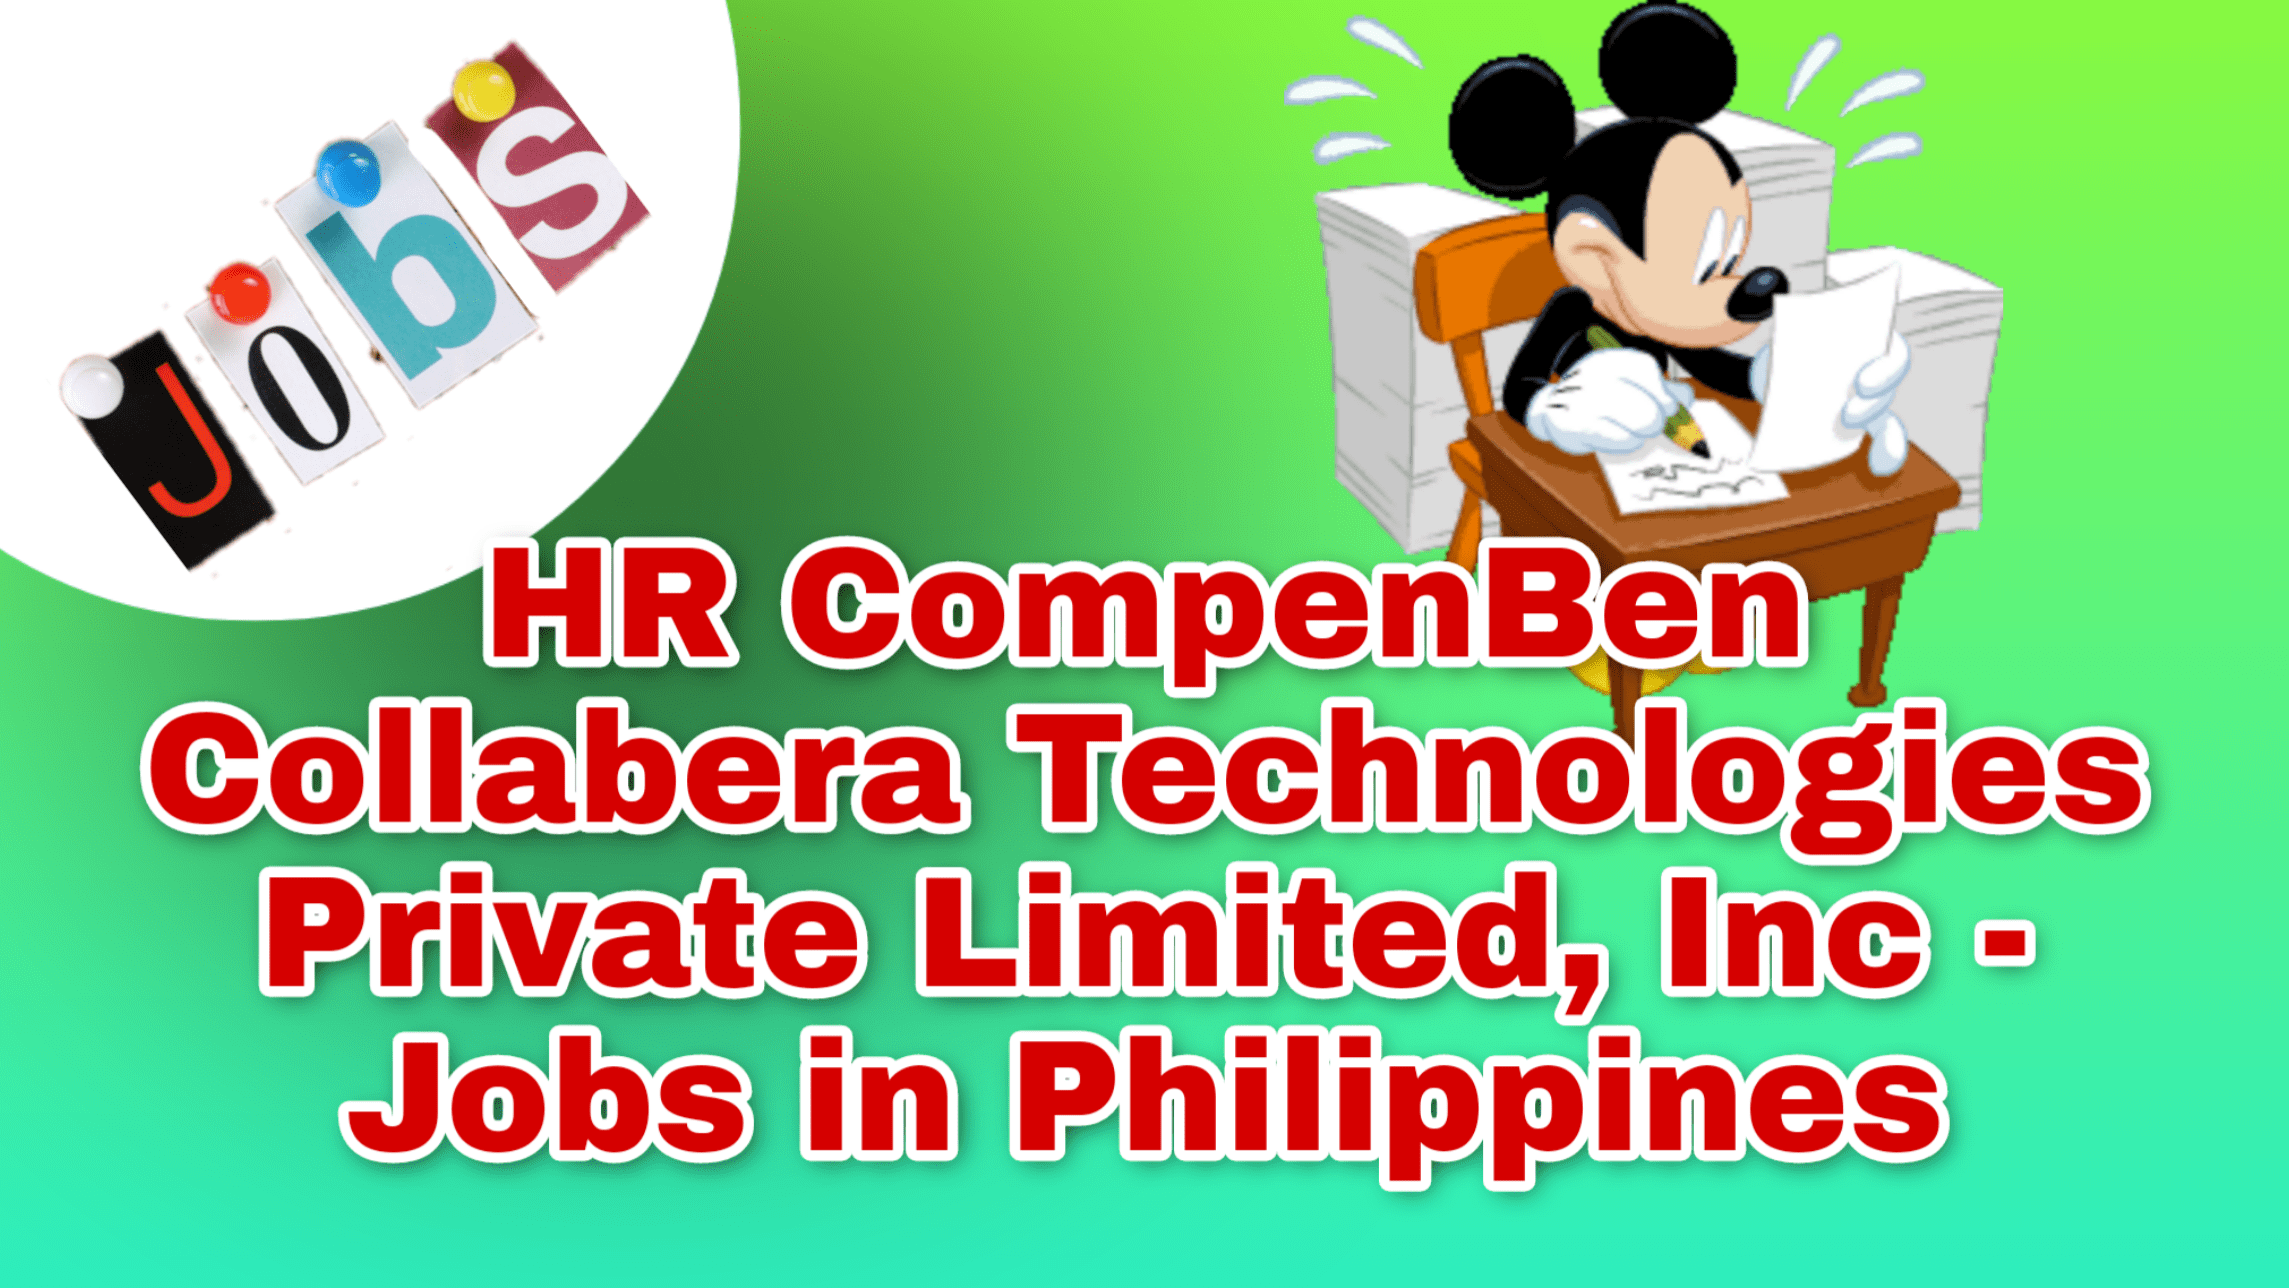 HR CompenBen Collabera Technologies Private Limited, Inc - Jobs in Philippines